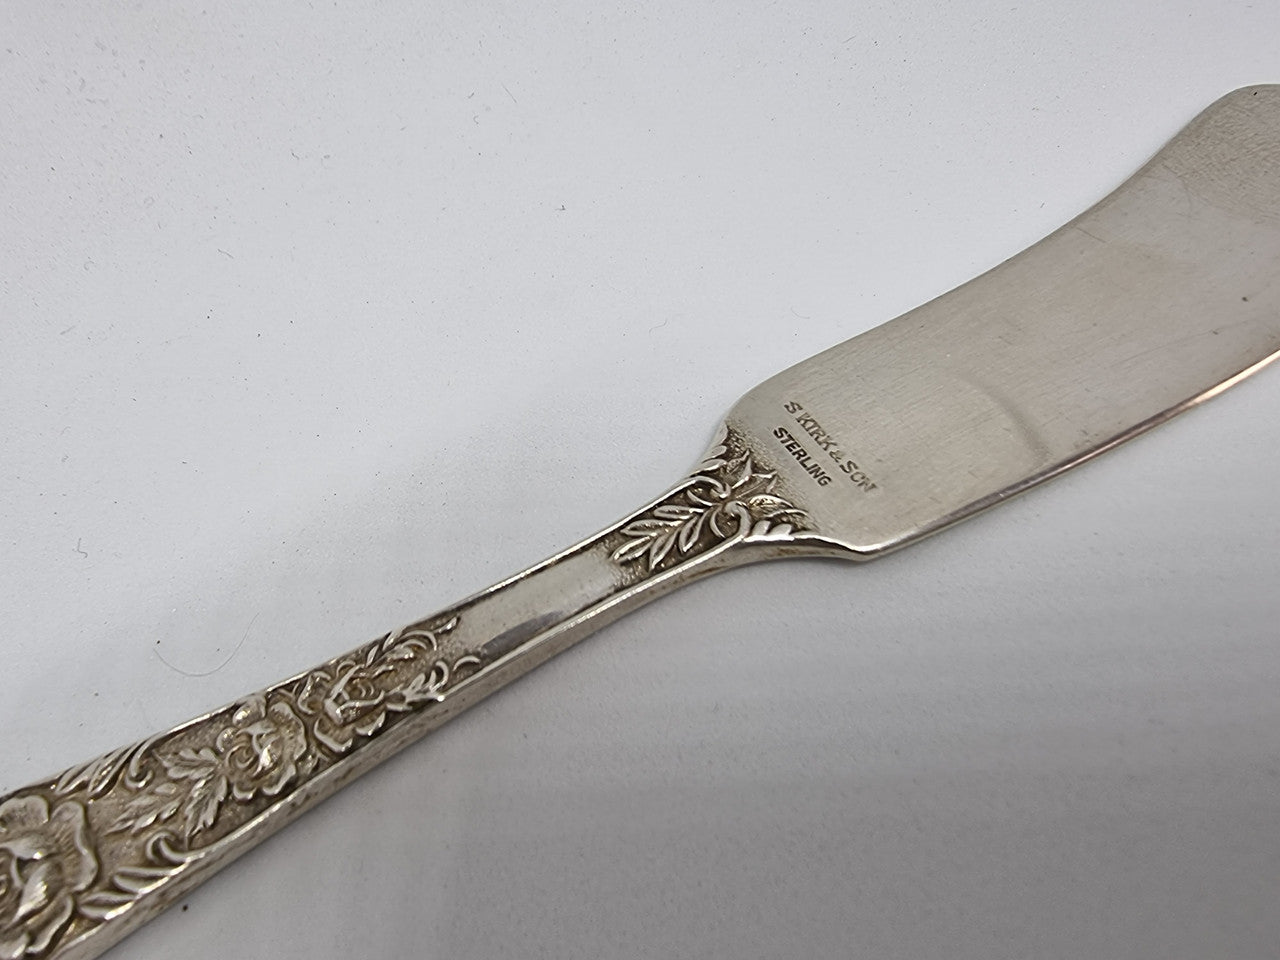 Very decorative American Kirk and Sons sterling silver butter knife in good original condition.